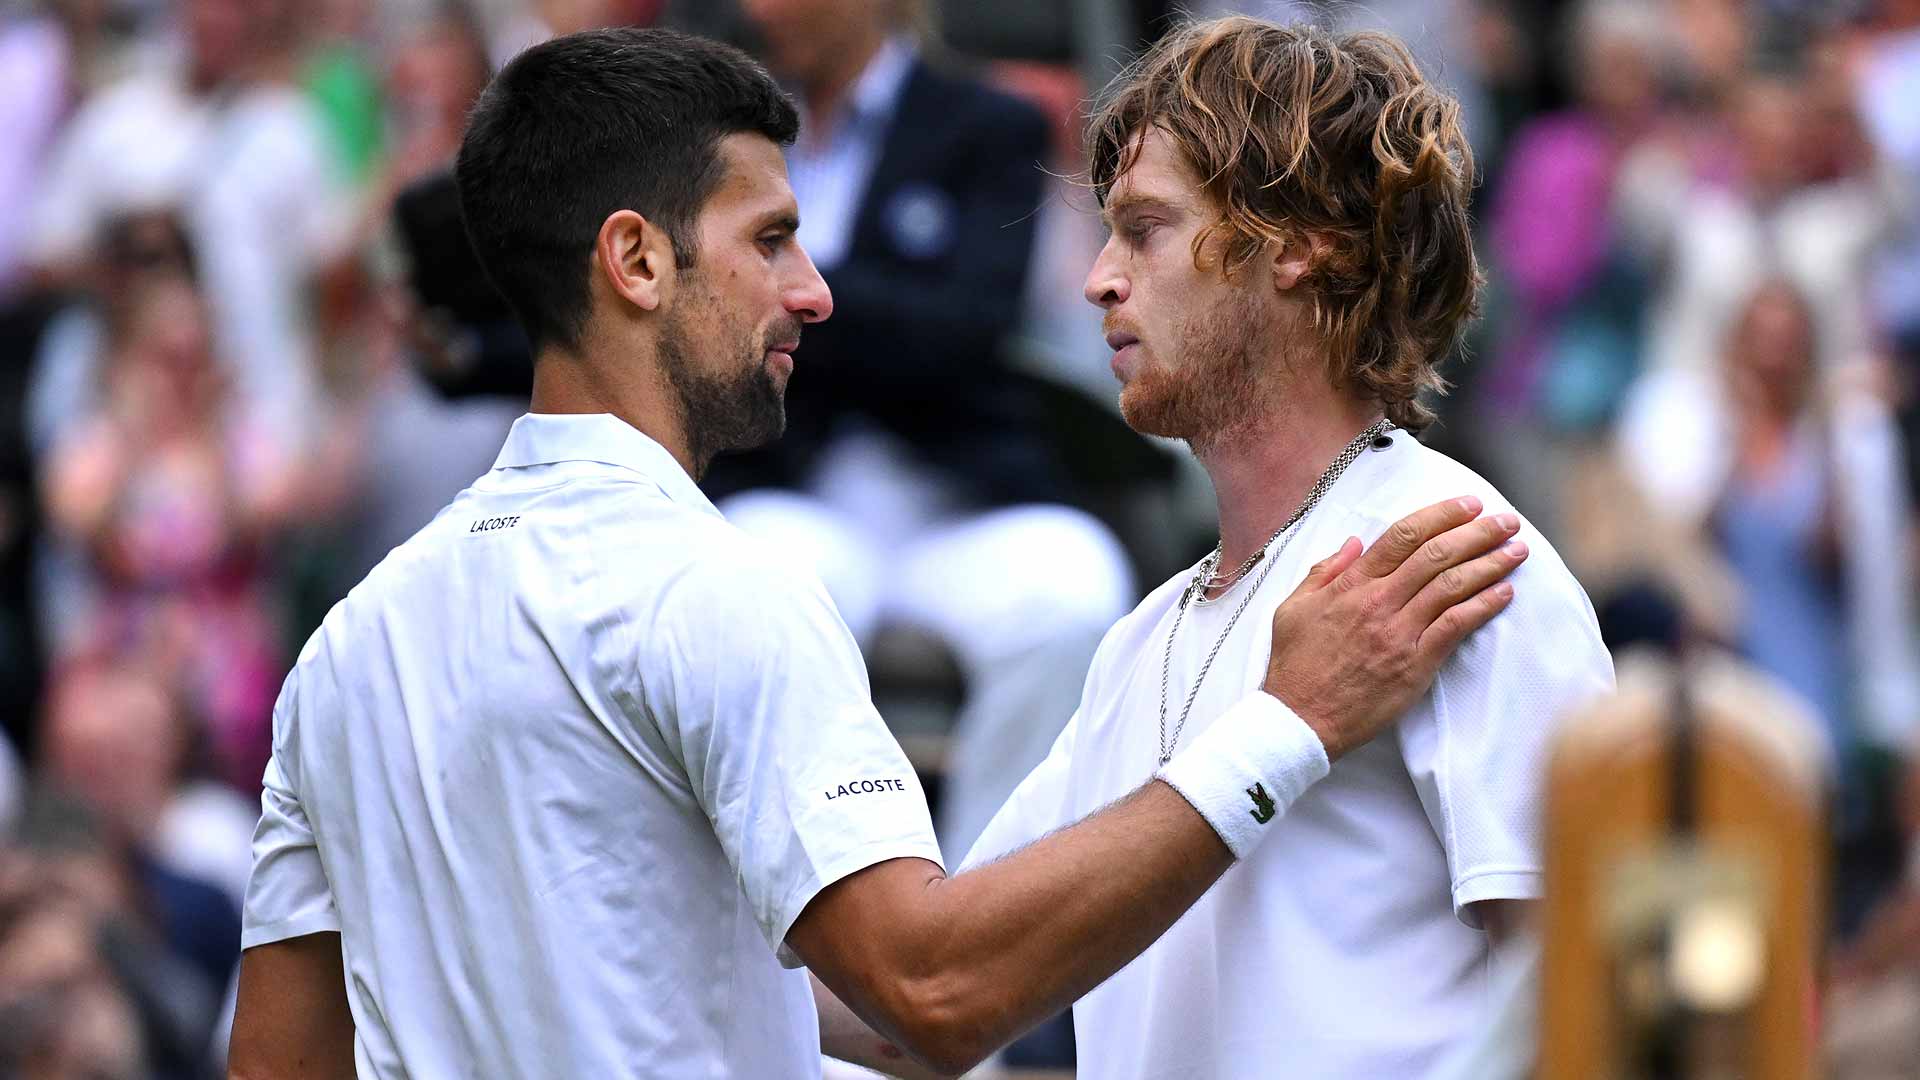 Novak Djokovic defeats Andrey Rublev in a major quarter-final for the second time this season.